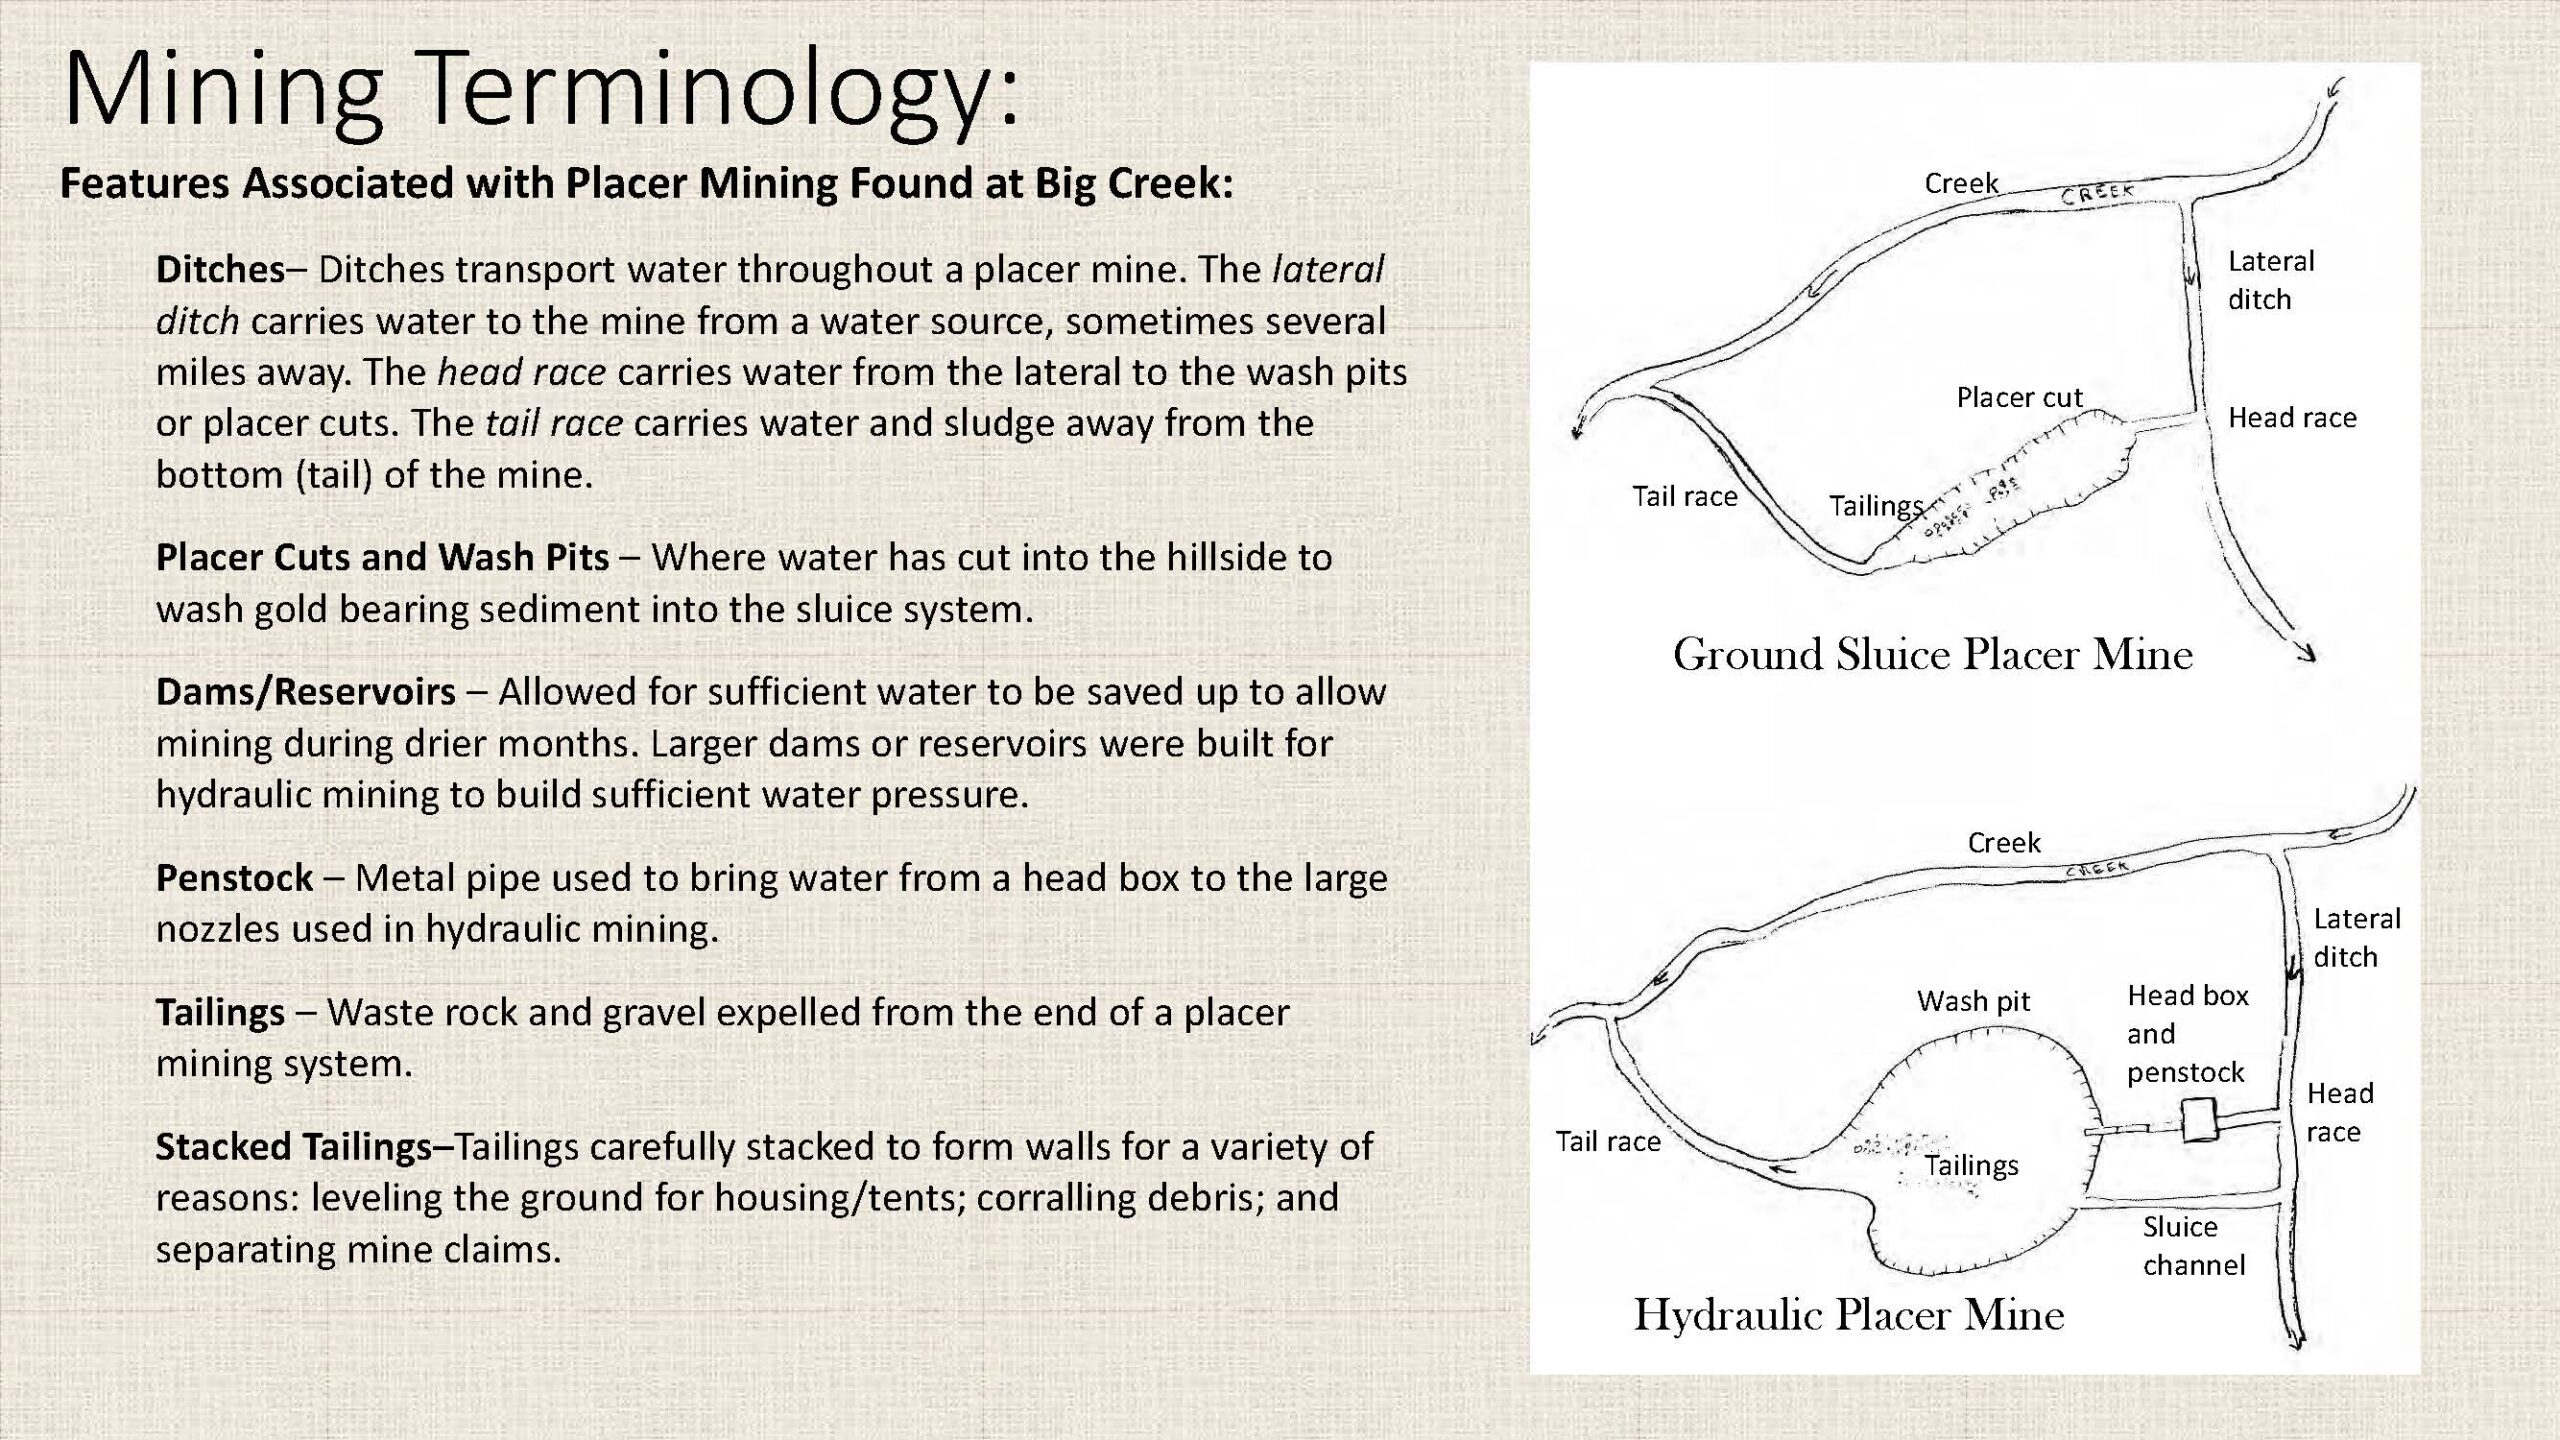 Mining Terminology: Features Associated with Placer Mining Found at Big Creek